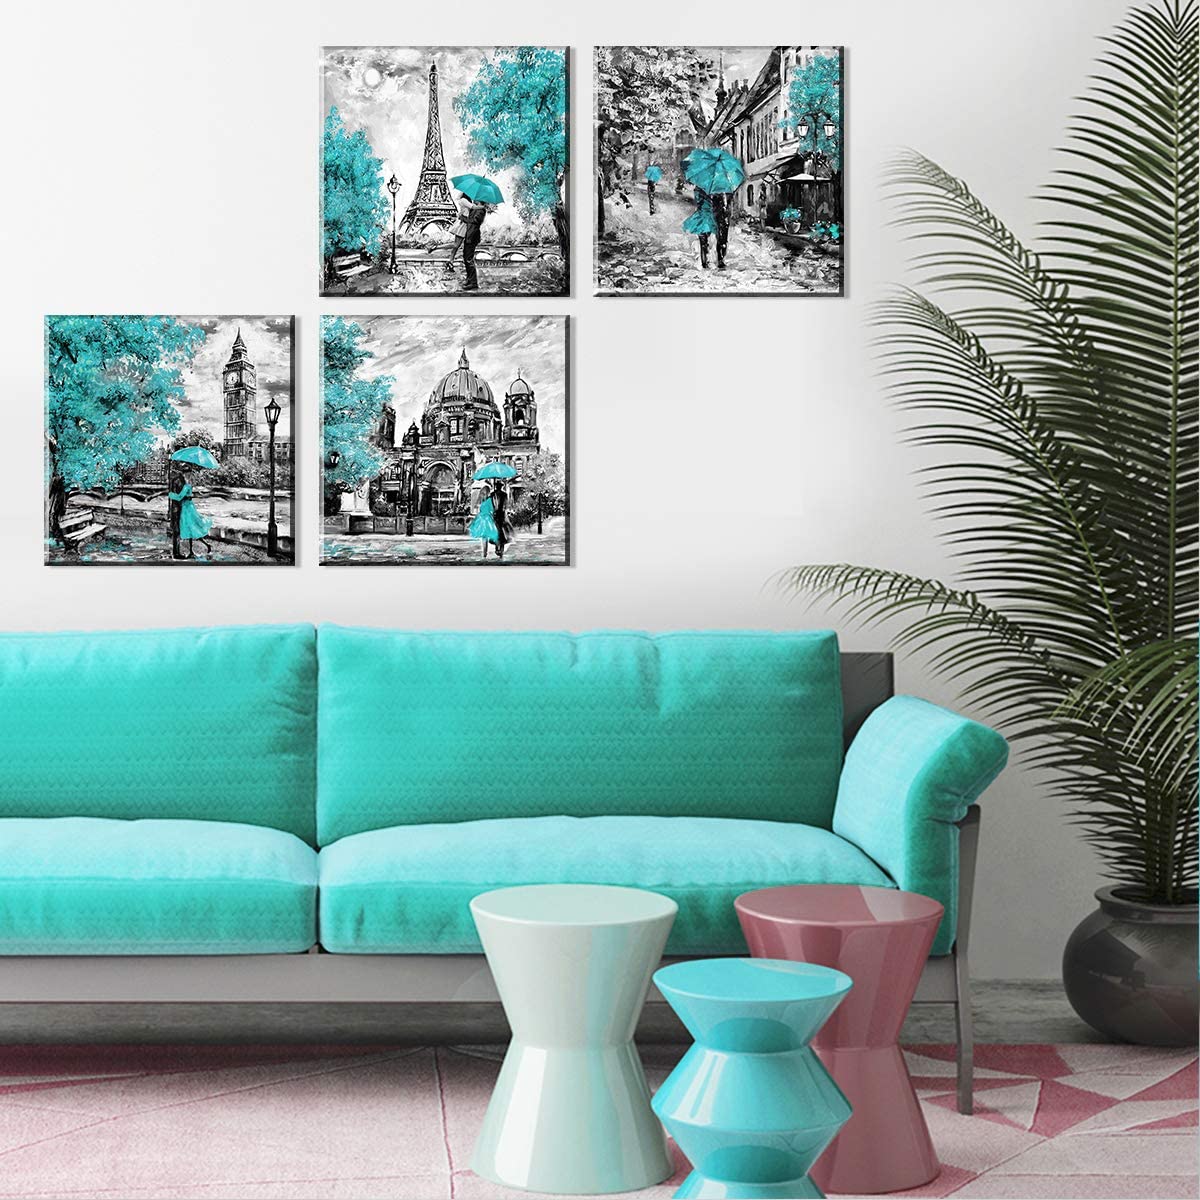 Paris Decor for Bedroom Teal Eiffel Tower Wall Decor Abstract Couples with  Umbrella Posters Bathroom Pictures Romantic City Painting Black and White Canvas  Wall Art Living Room 12x12